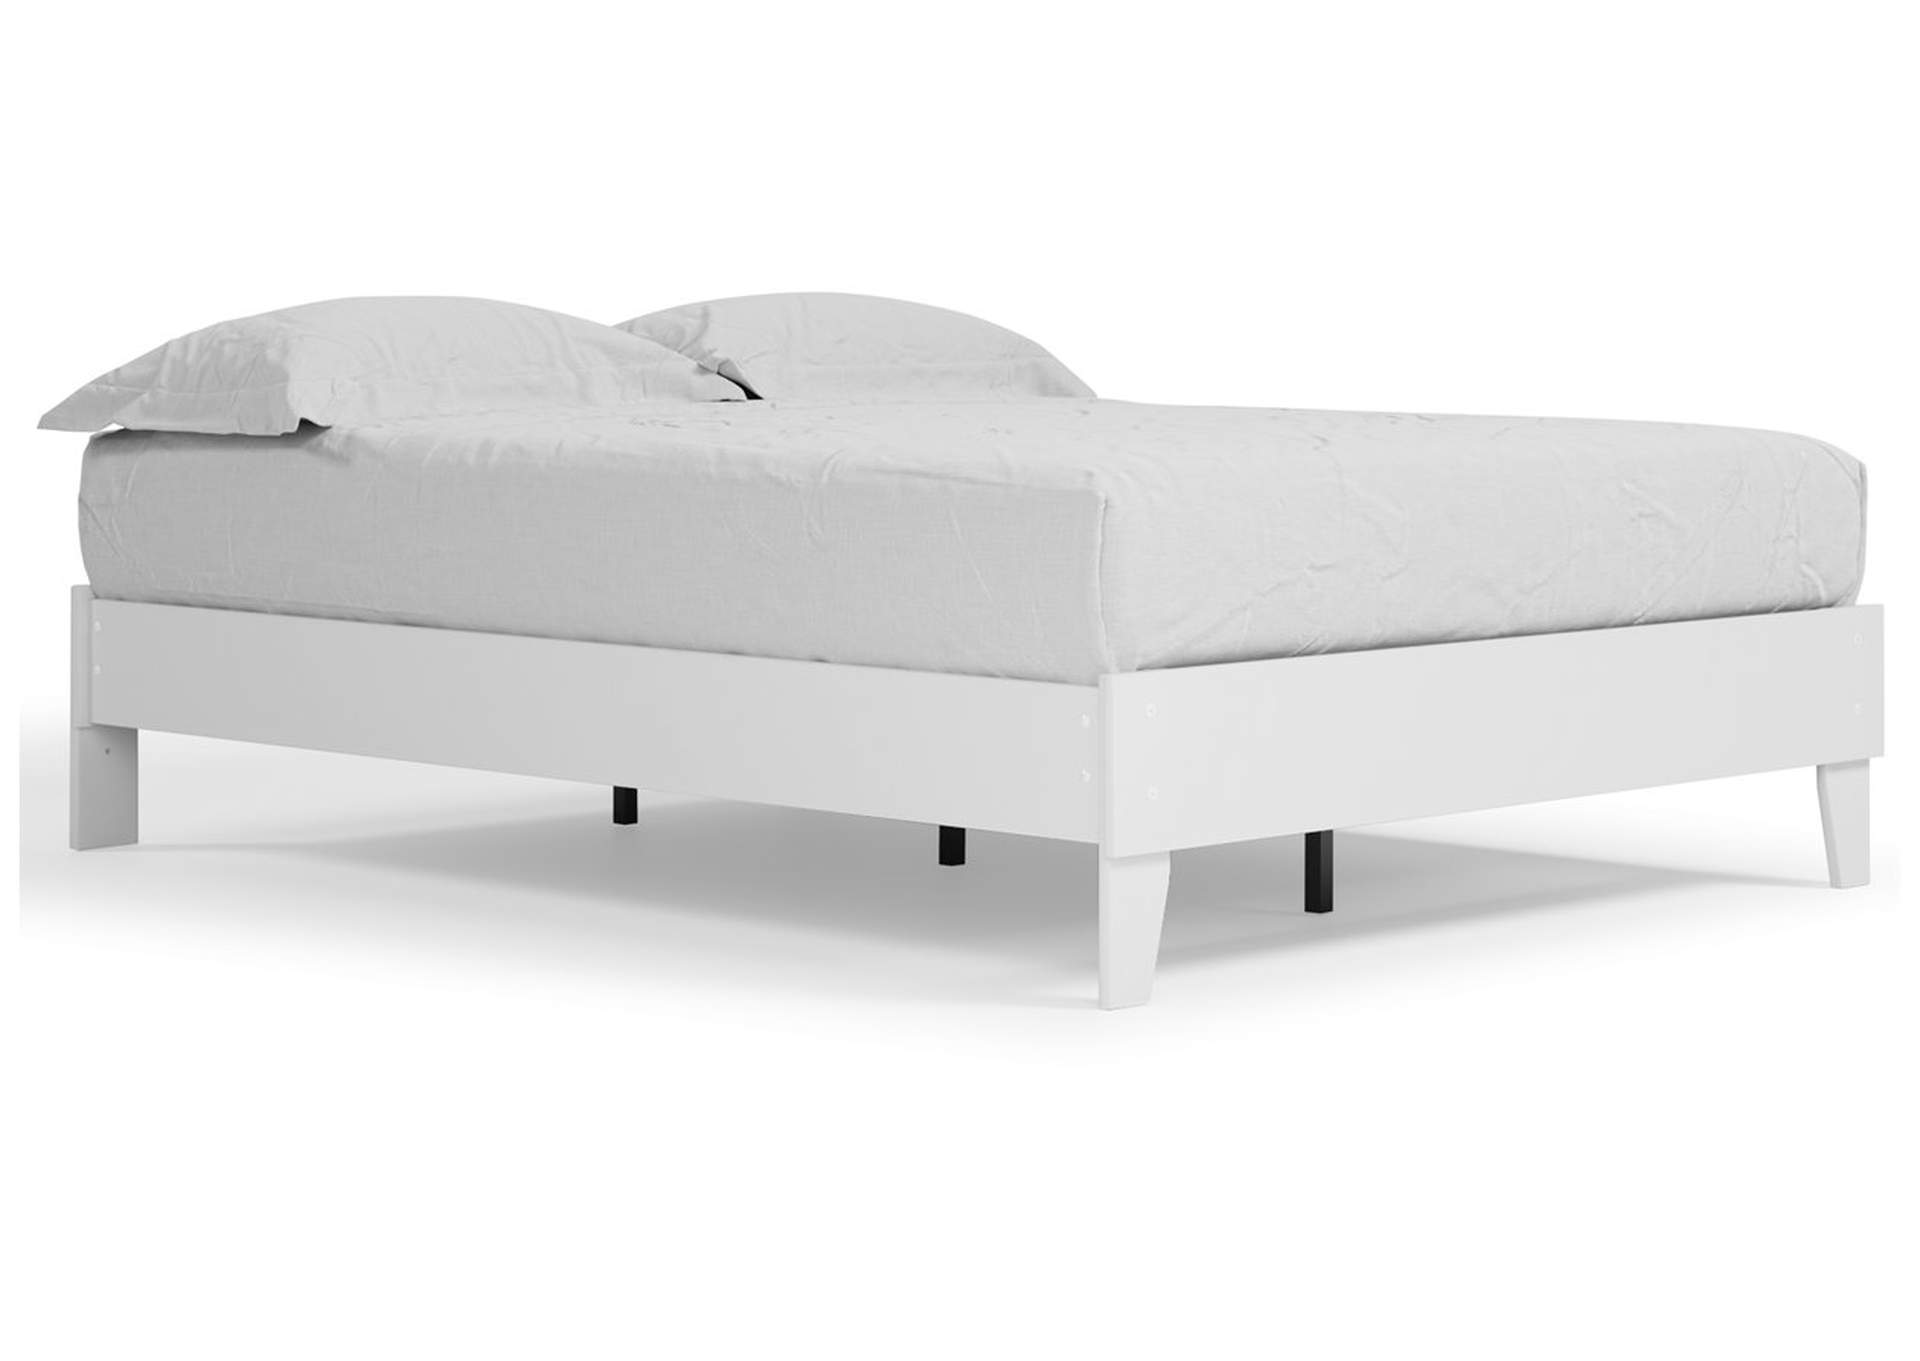 Piperton Queen Platform Bed,Direct To Consumer Express